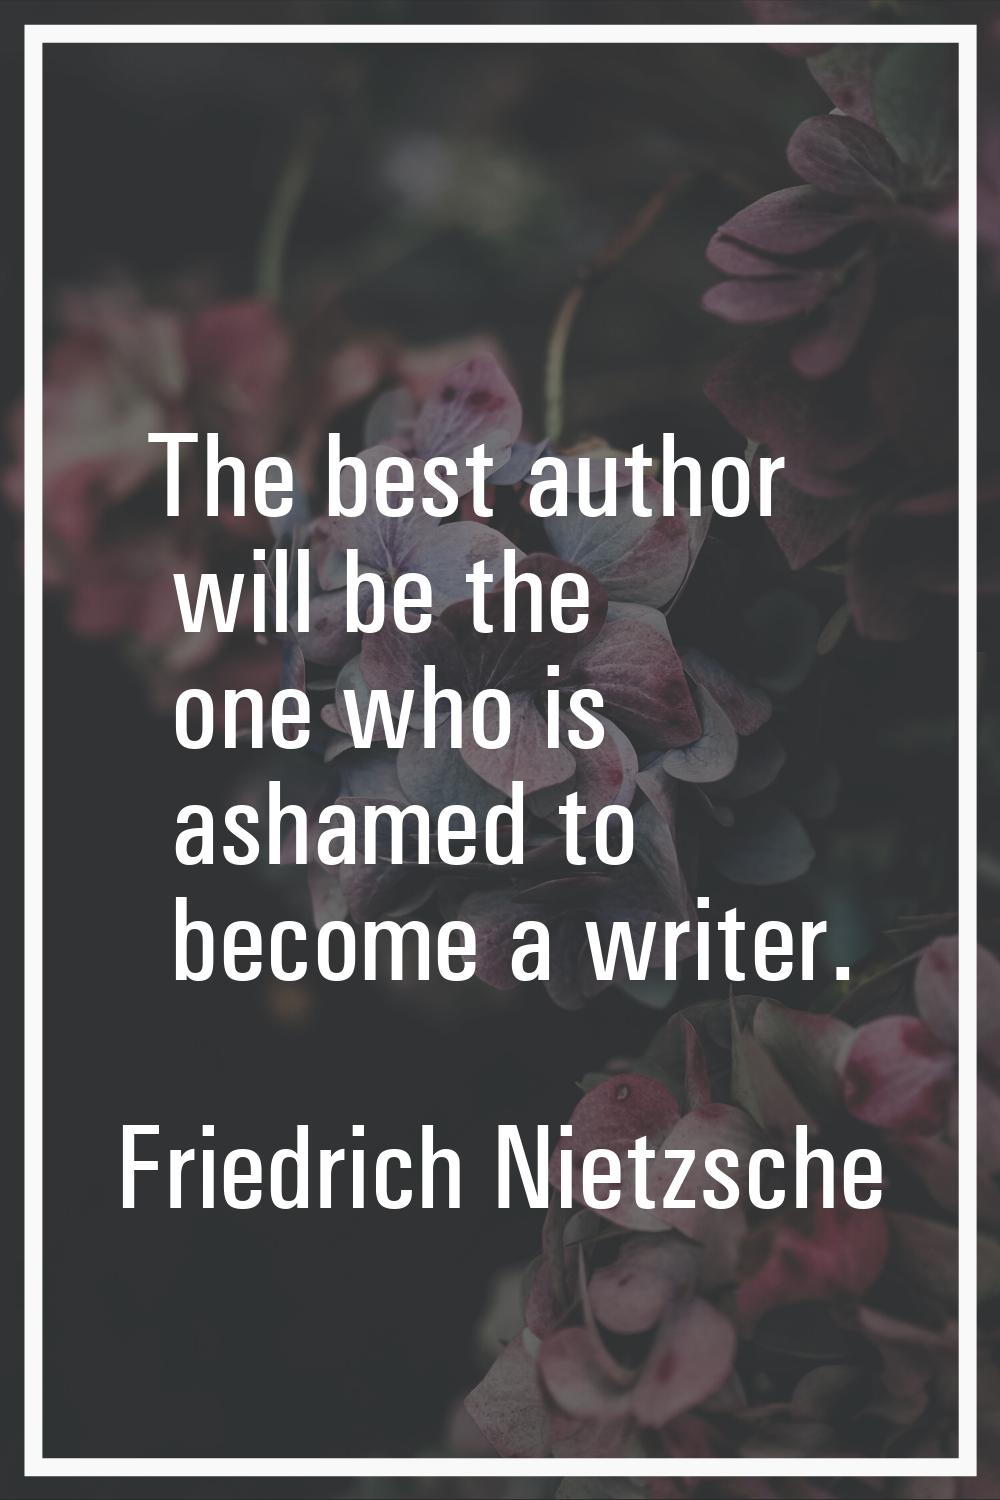 The best author will be the one who is ashamed to become a writer.